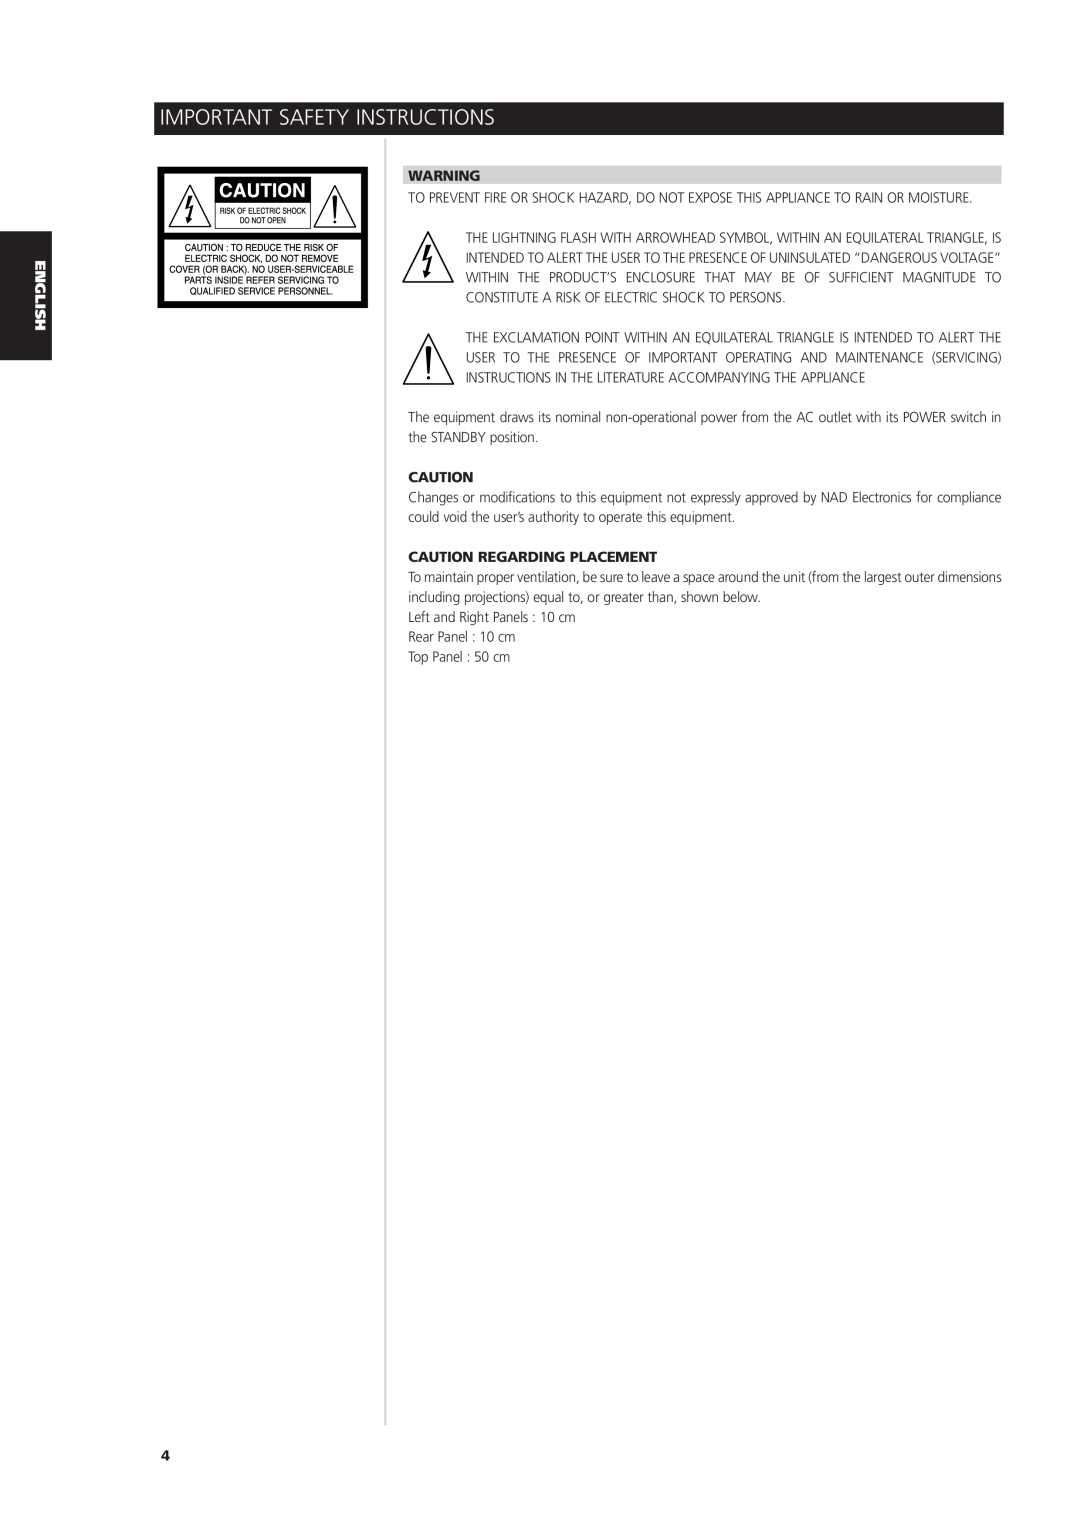 NAD L 76 owner manual Caution Regarding Placement, Important Safety Instructions 